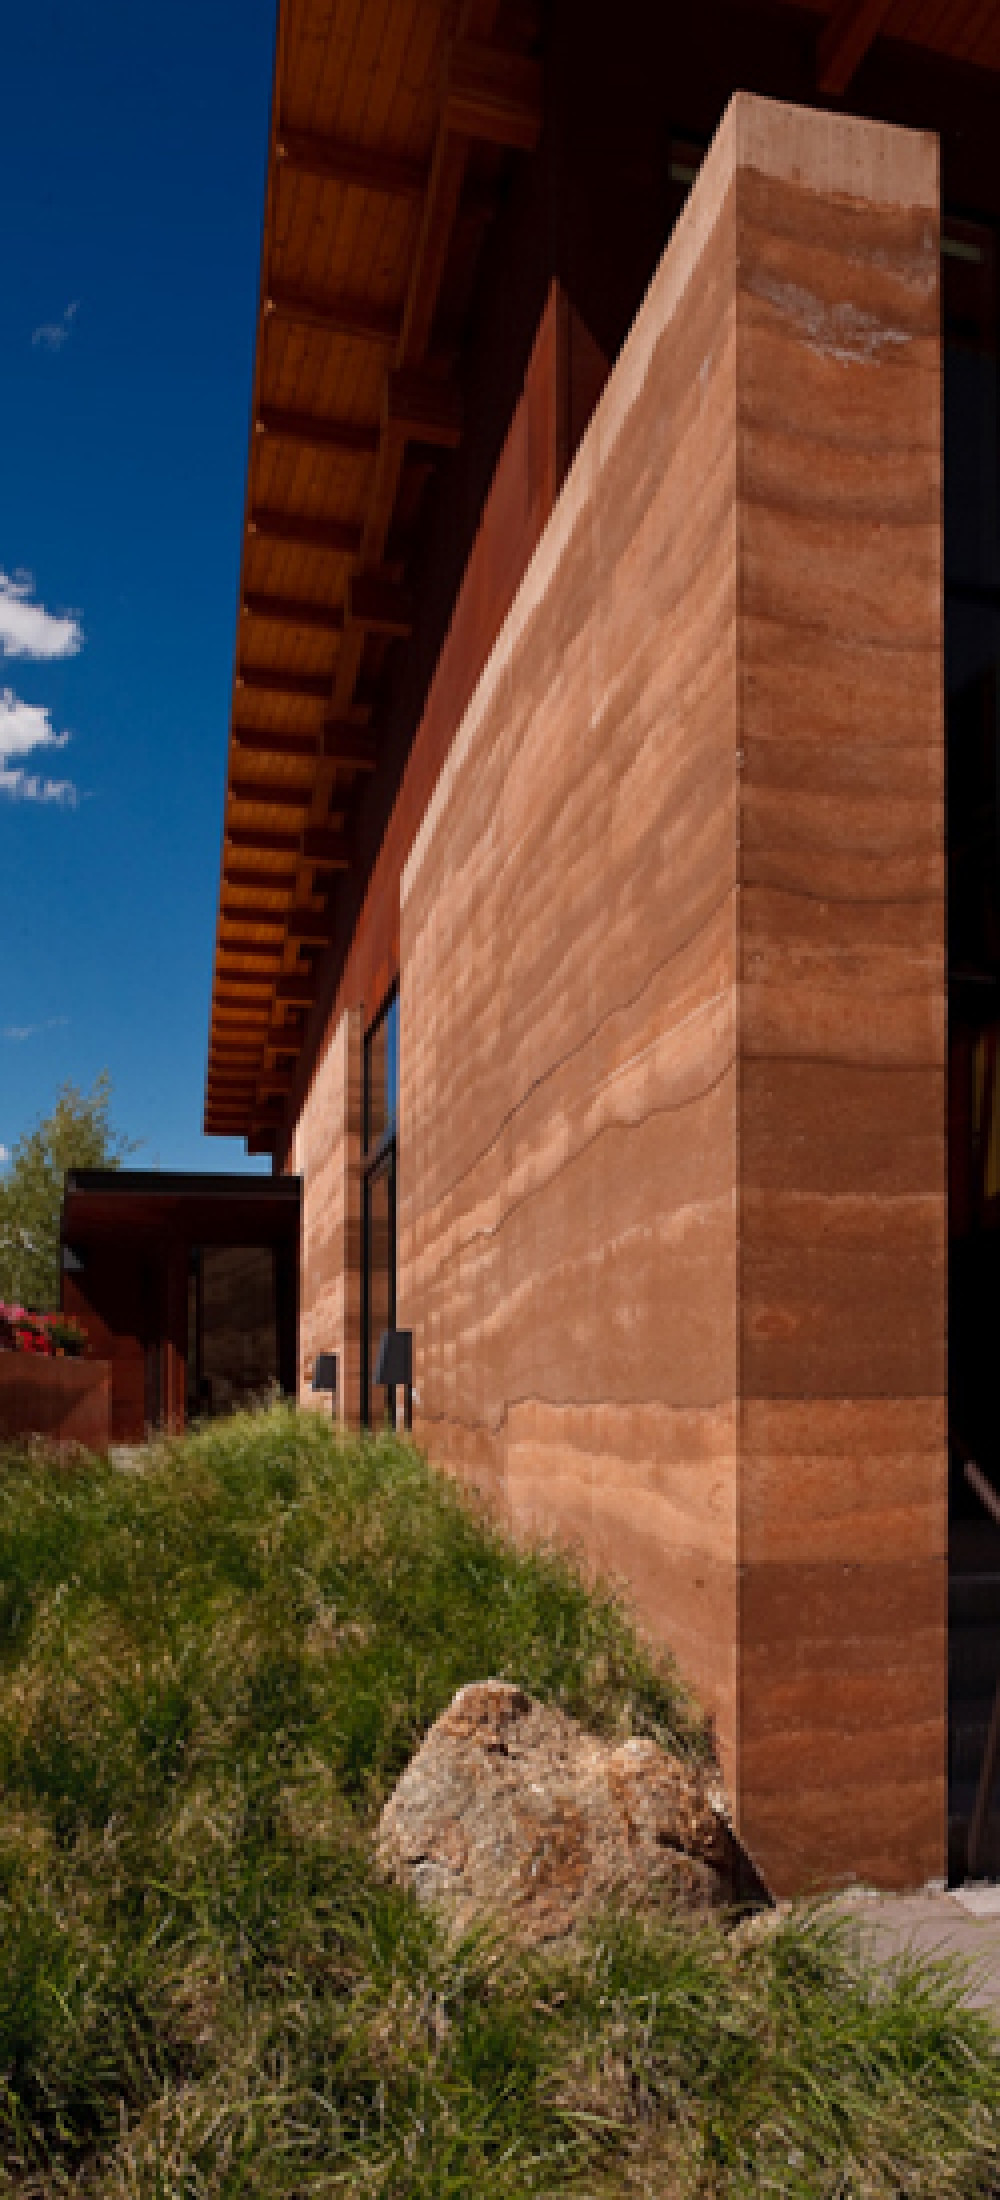 Rammed Earth Architecture | The Journal | Rodell AIA